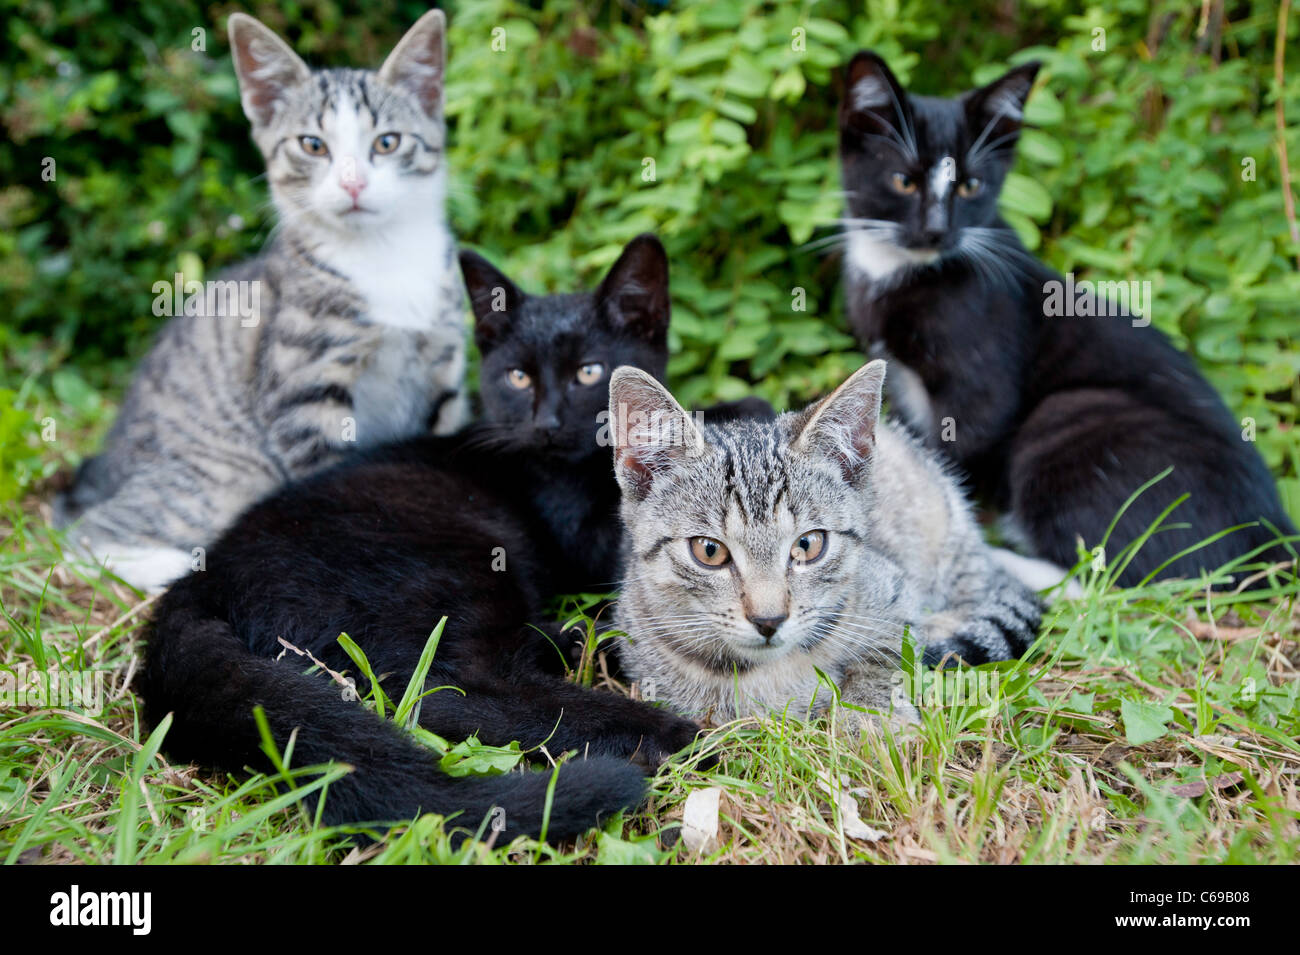 Cute cats together Stock Photo